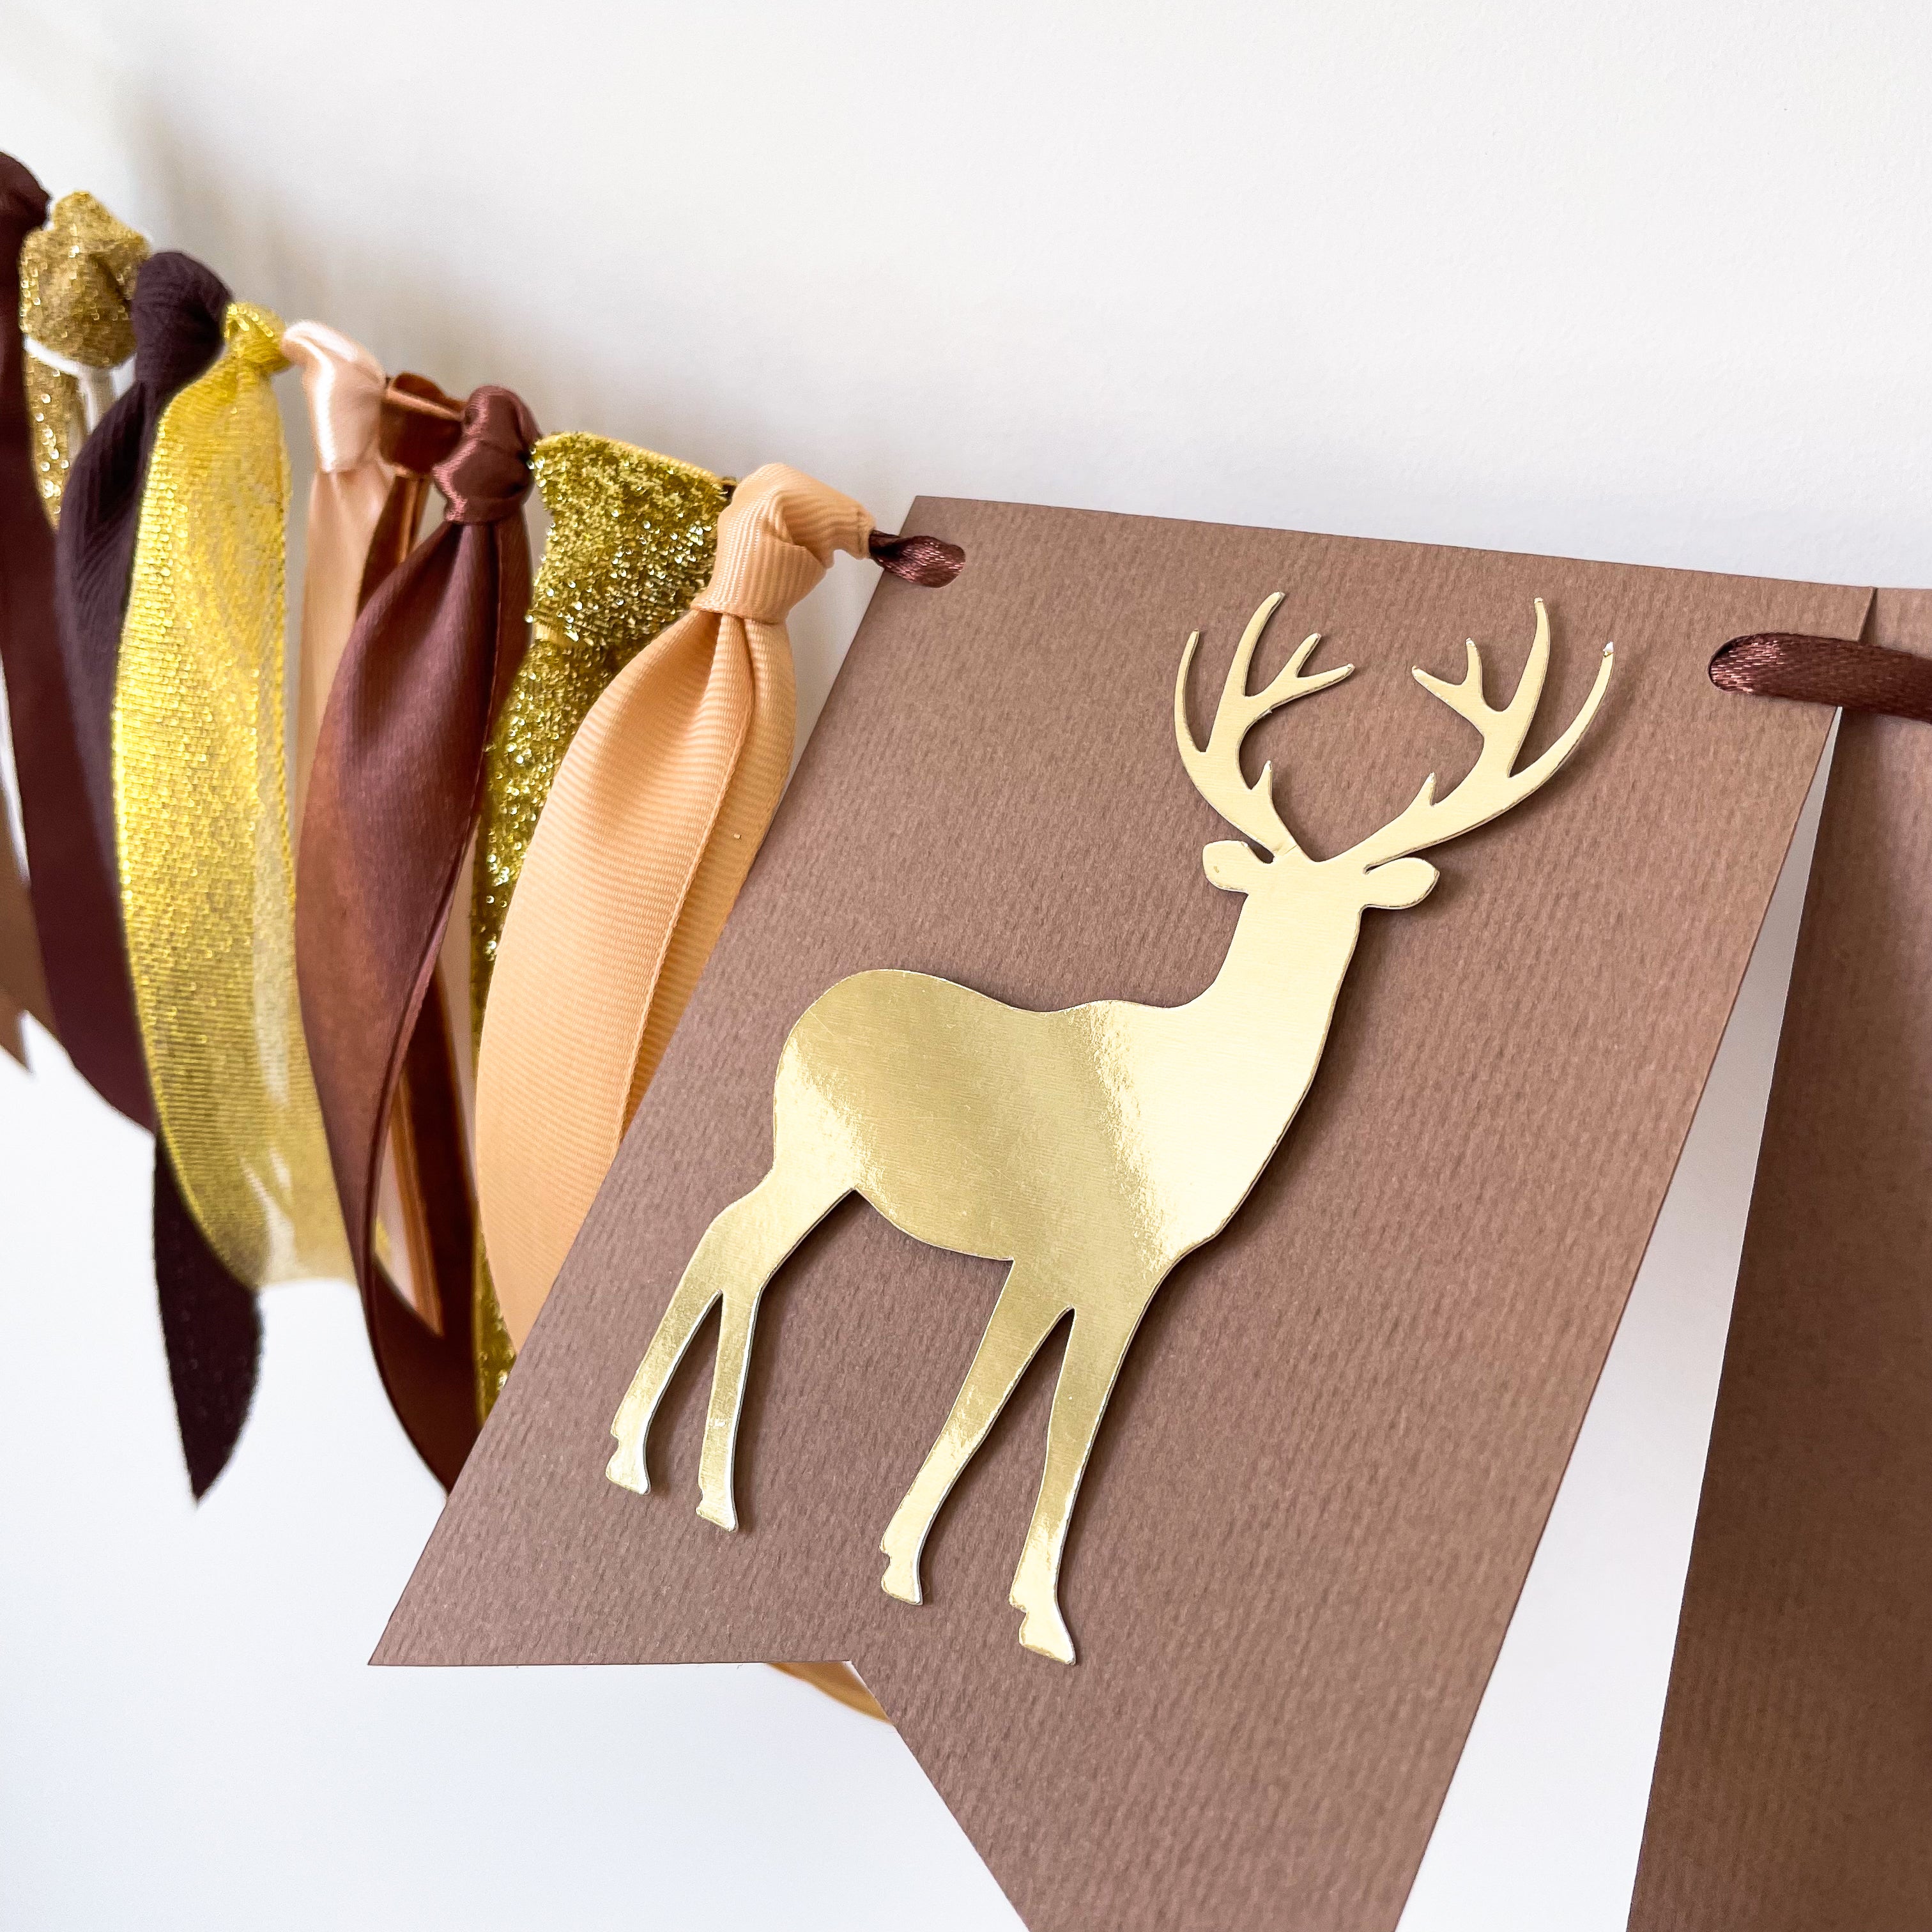 Deer One Highchair Banner to match Woodland Birthday Decorations, Deer Birthday, Forest Birthday Theme party decorations perfectly.